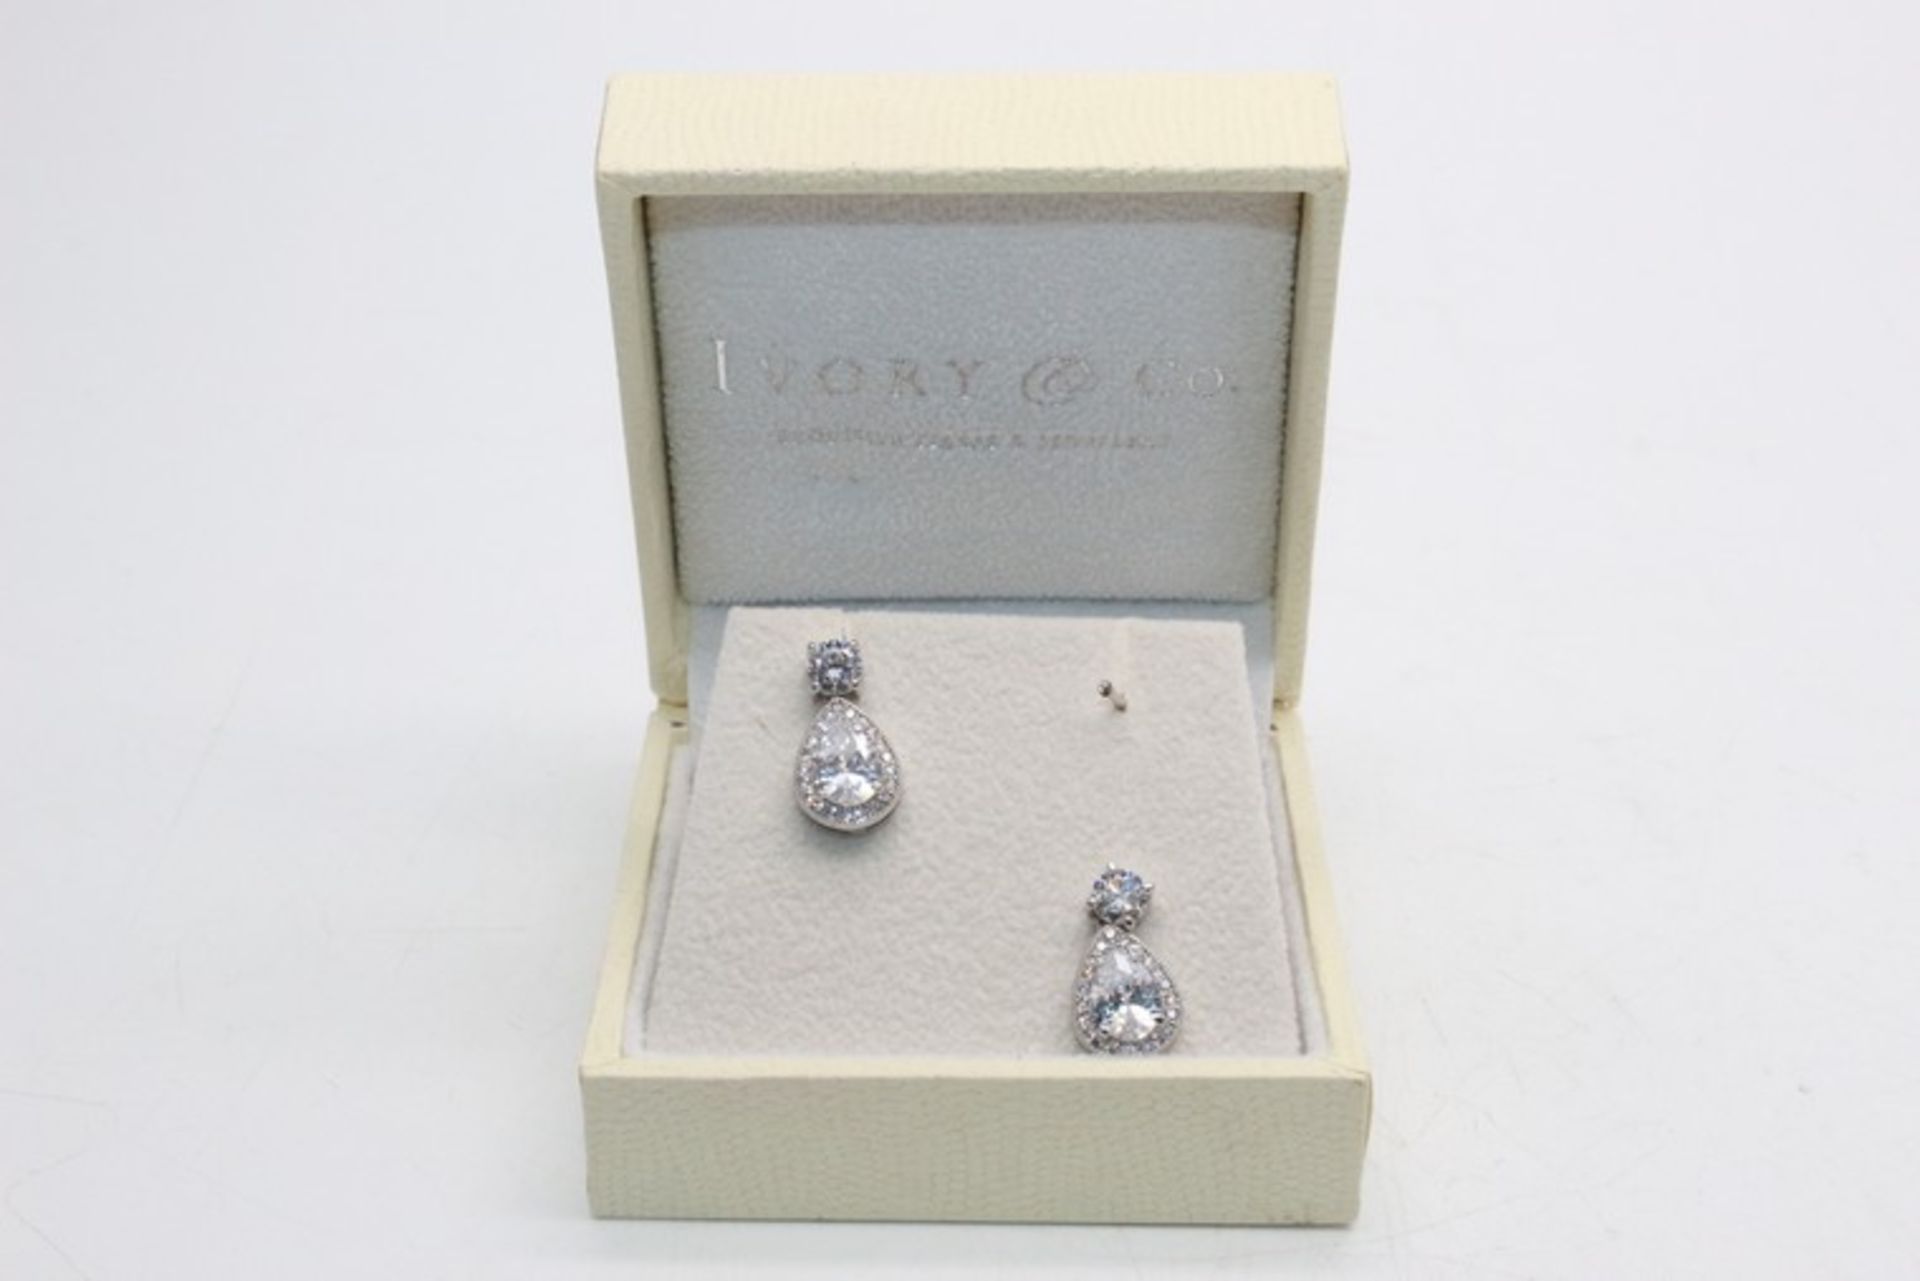 1 x BOXED WOMENS IVORY AND CO DESIGNER EARRINGS (07.09.17) (2637880) *PLEASE NOTE THAT THE BID PRICE